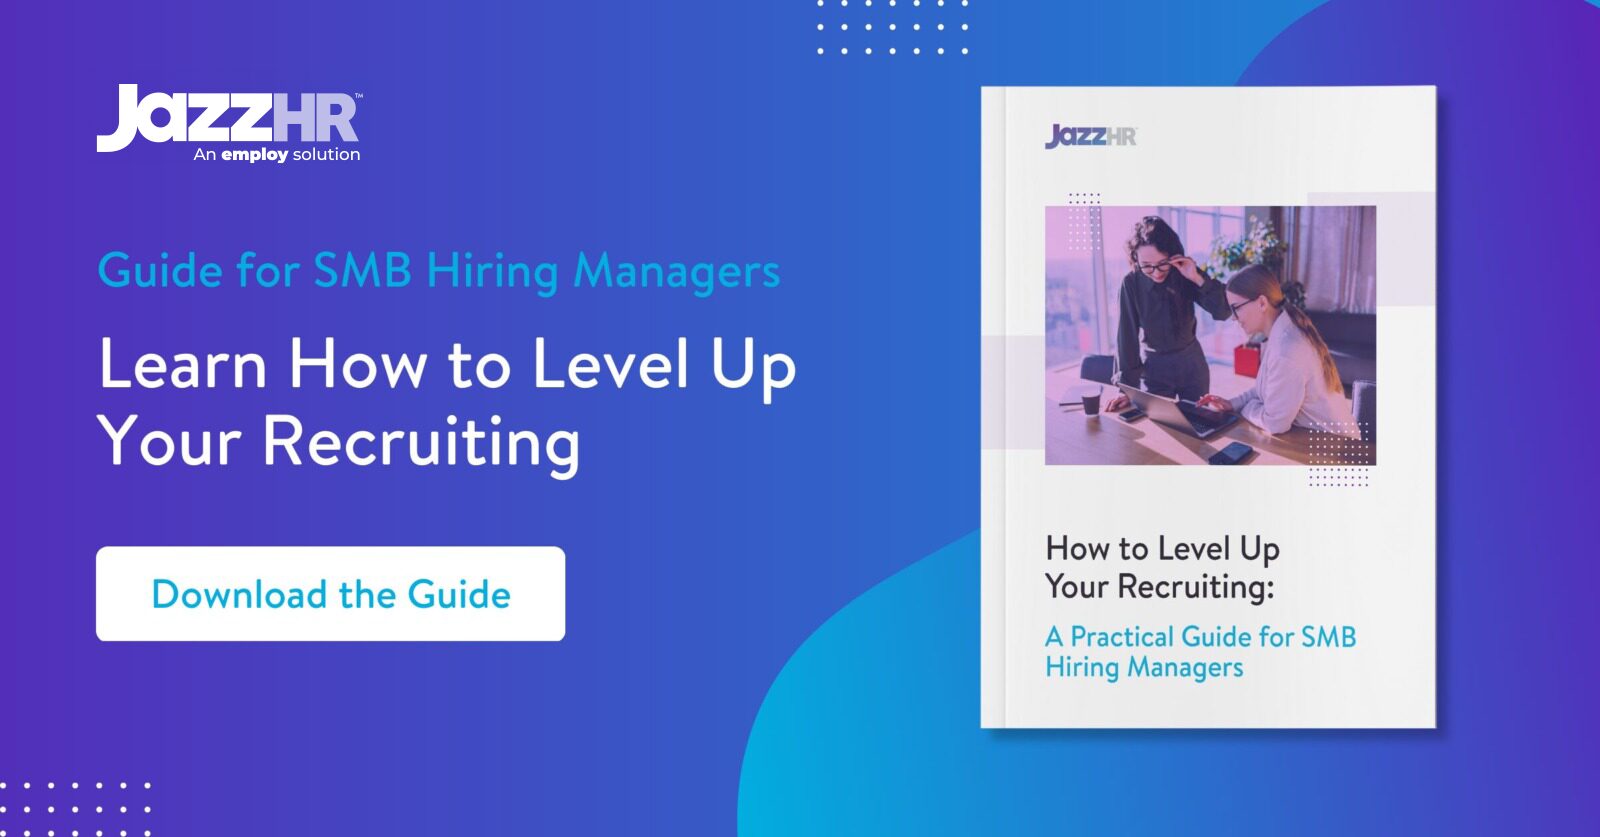 Click here to find out how you can level up your SMB’s hiring managers.